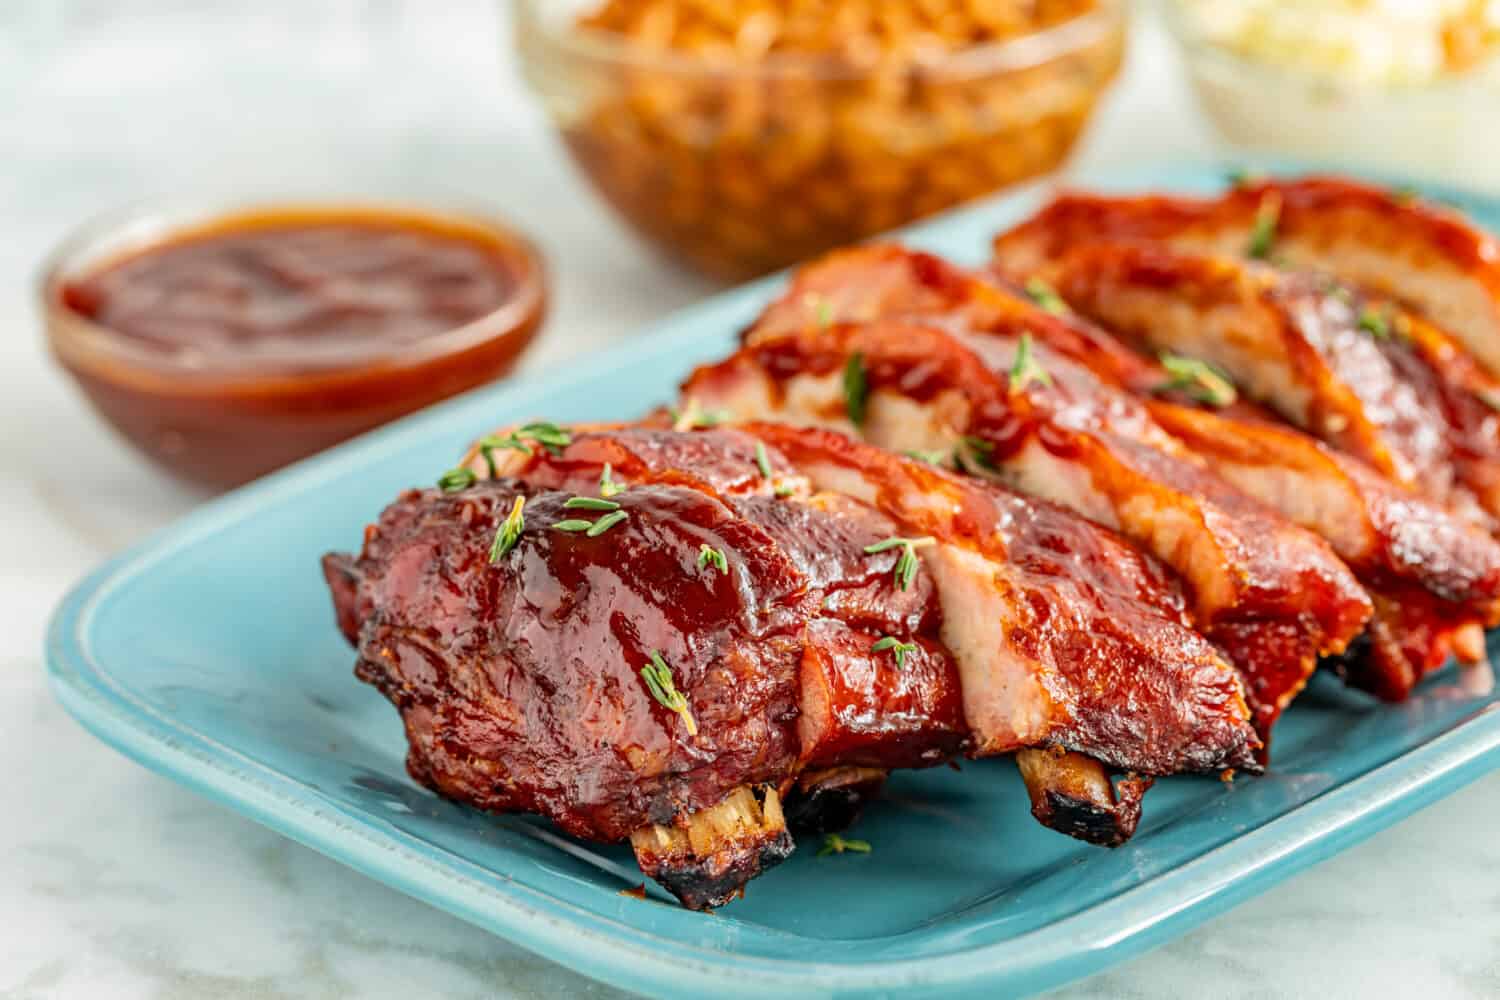 Close up of rack of bbq smoked ribs sliced on bright blue plate with sides of cole slaw and backed beans in background and bowl of sauce